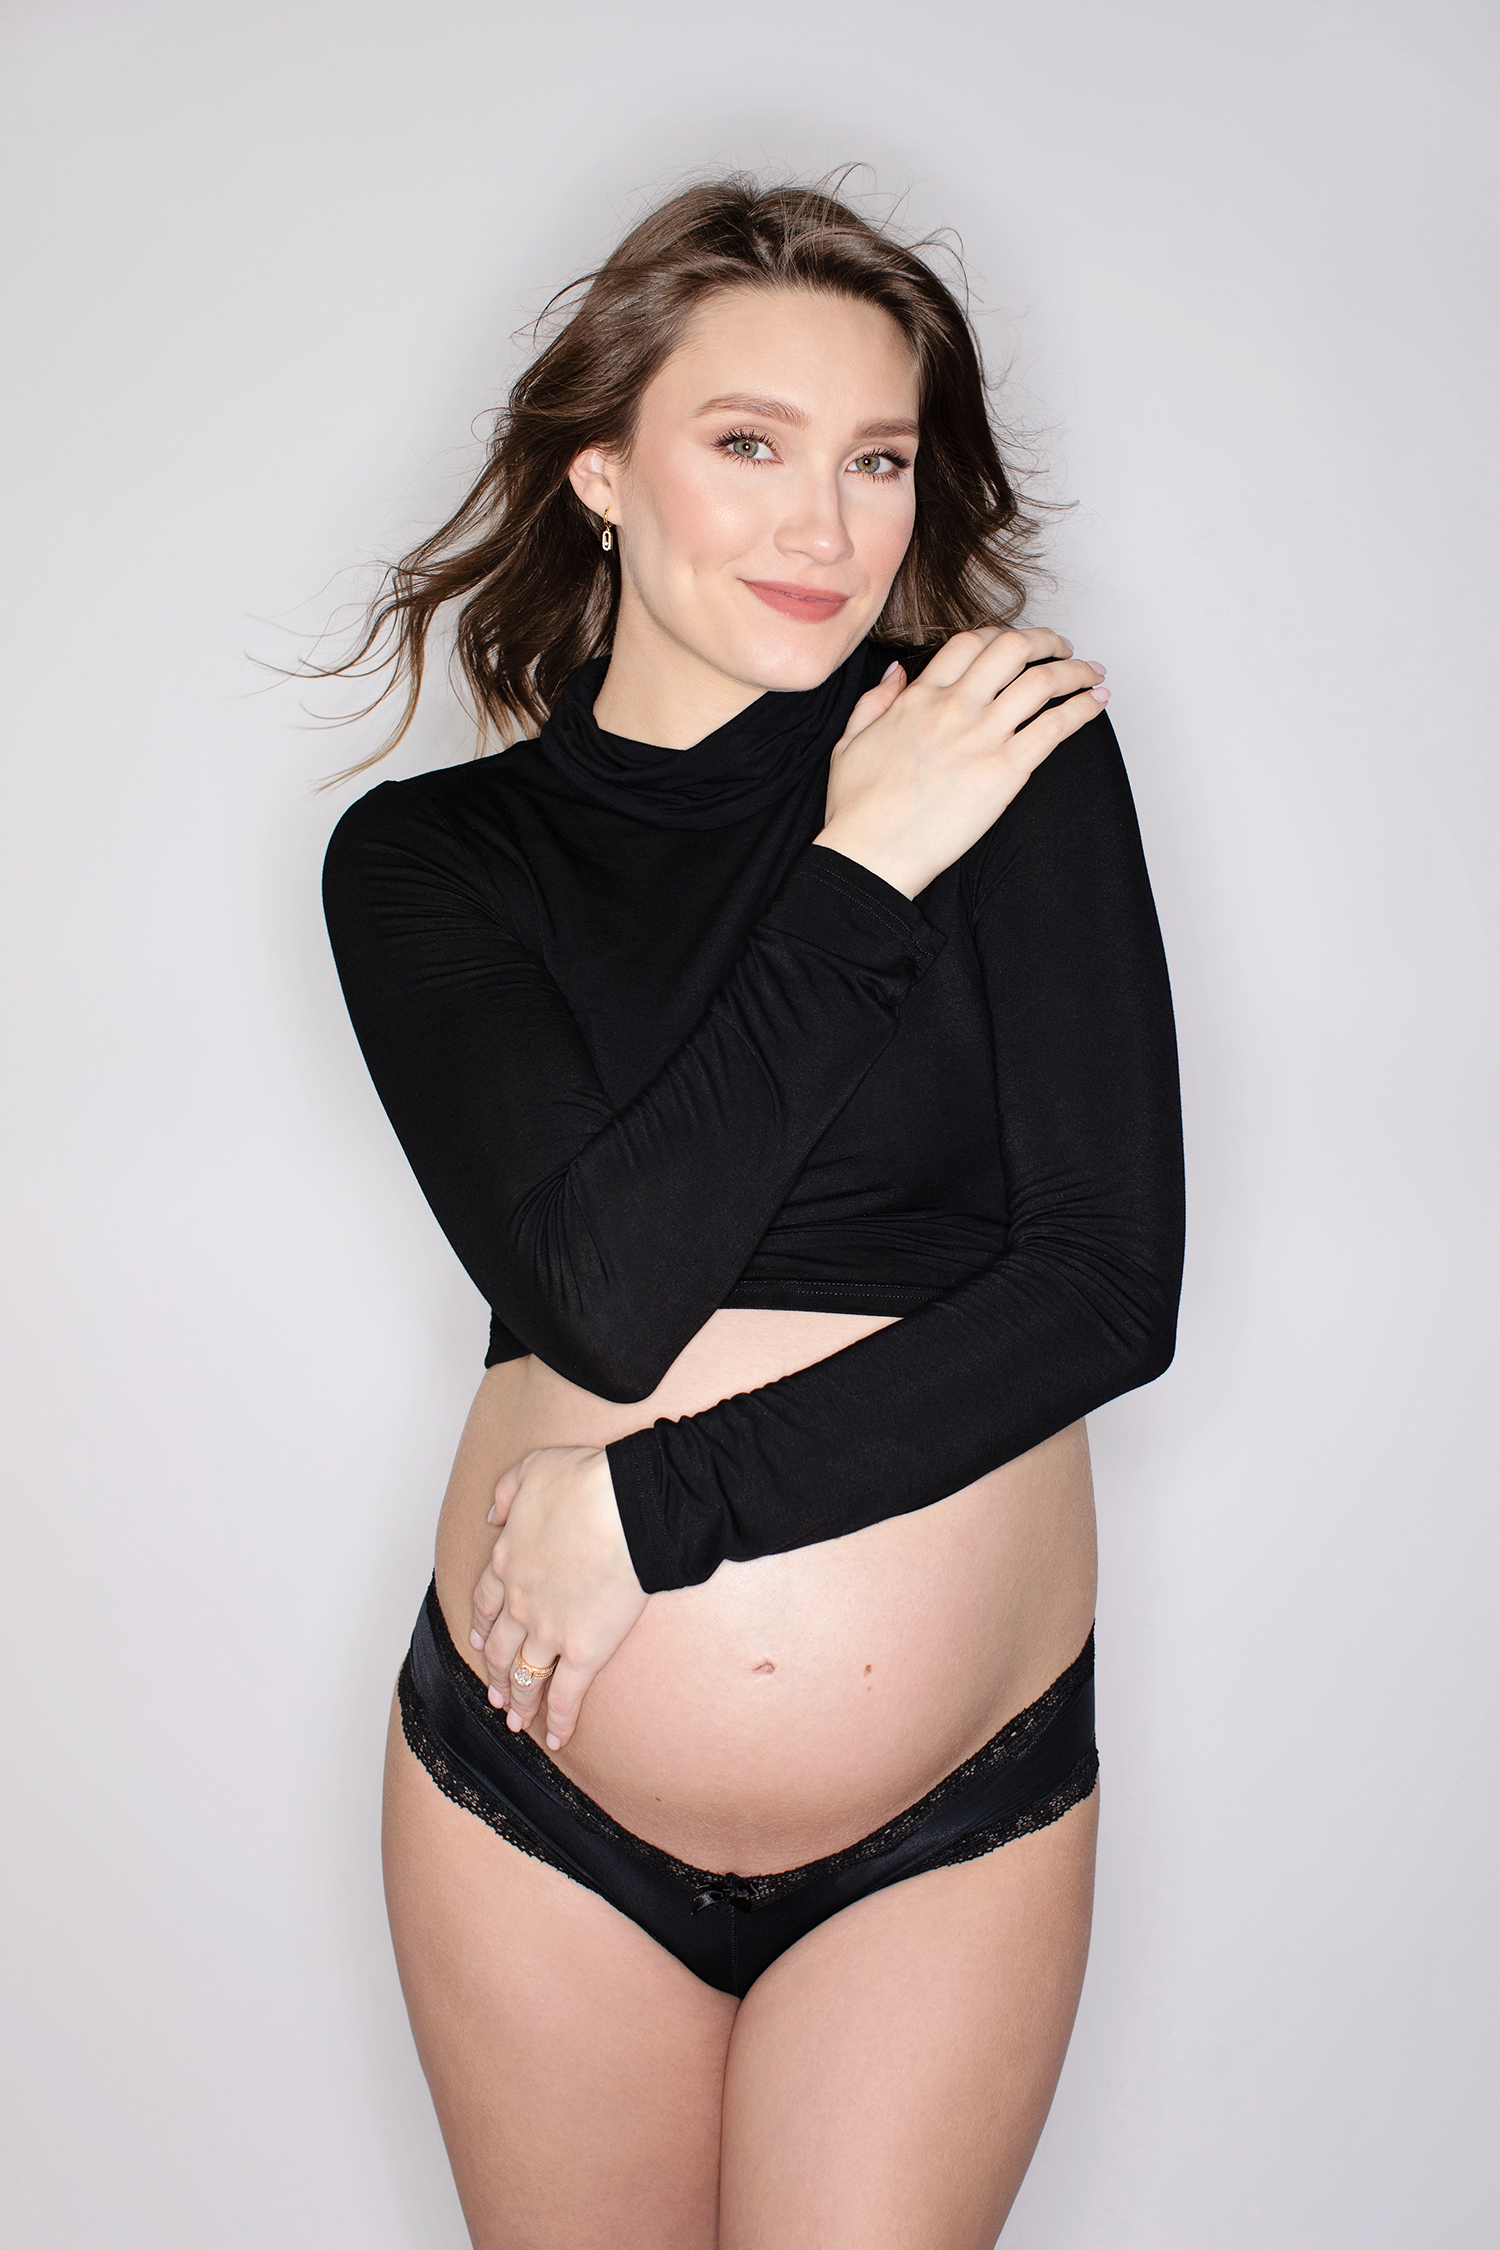 maternity image of pregnant woman with hair blowing for fashion session